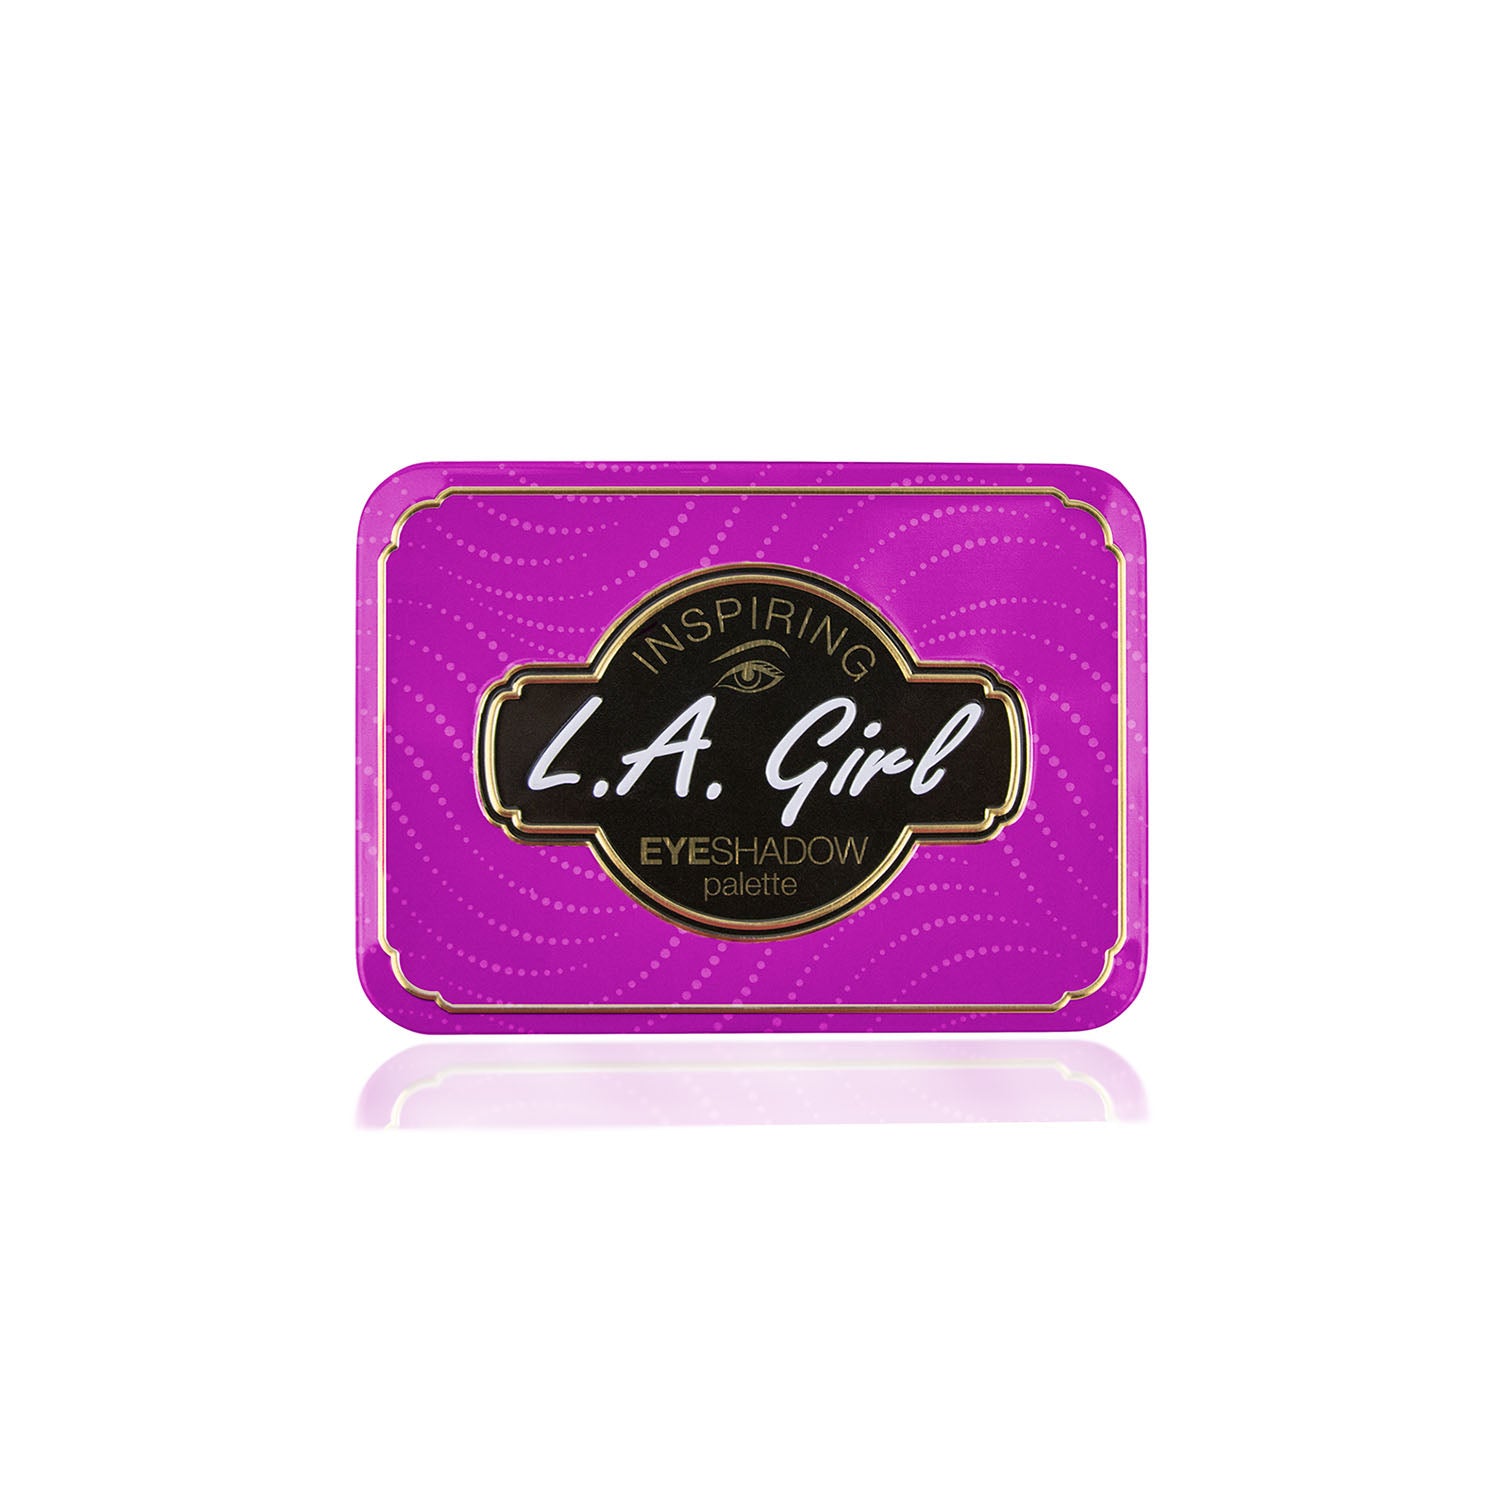 L.A. Girl Inspiring Eyeshadow Palette - Get Glam and Get Going